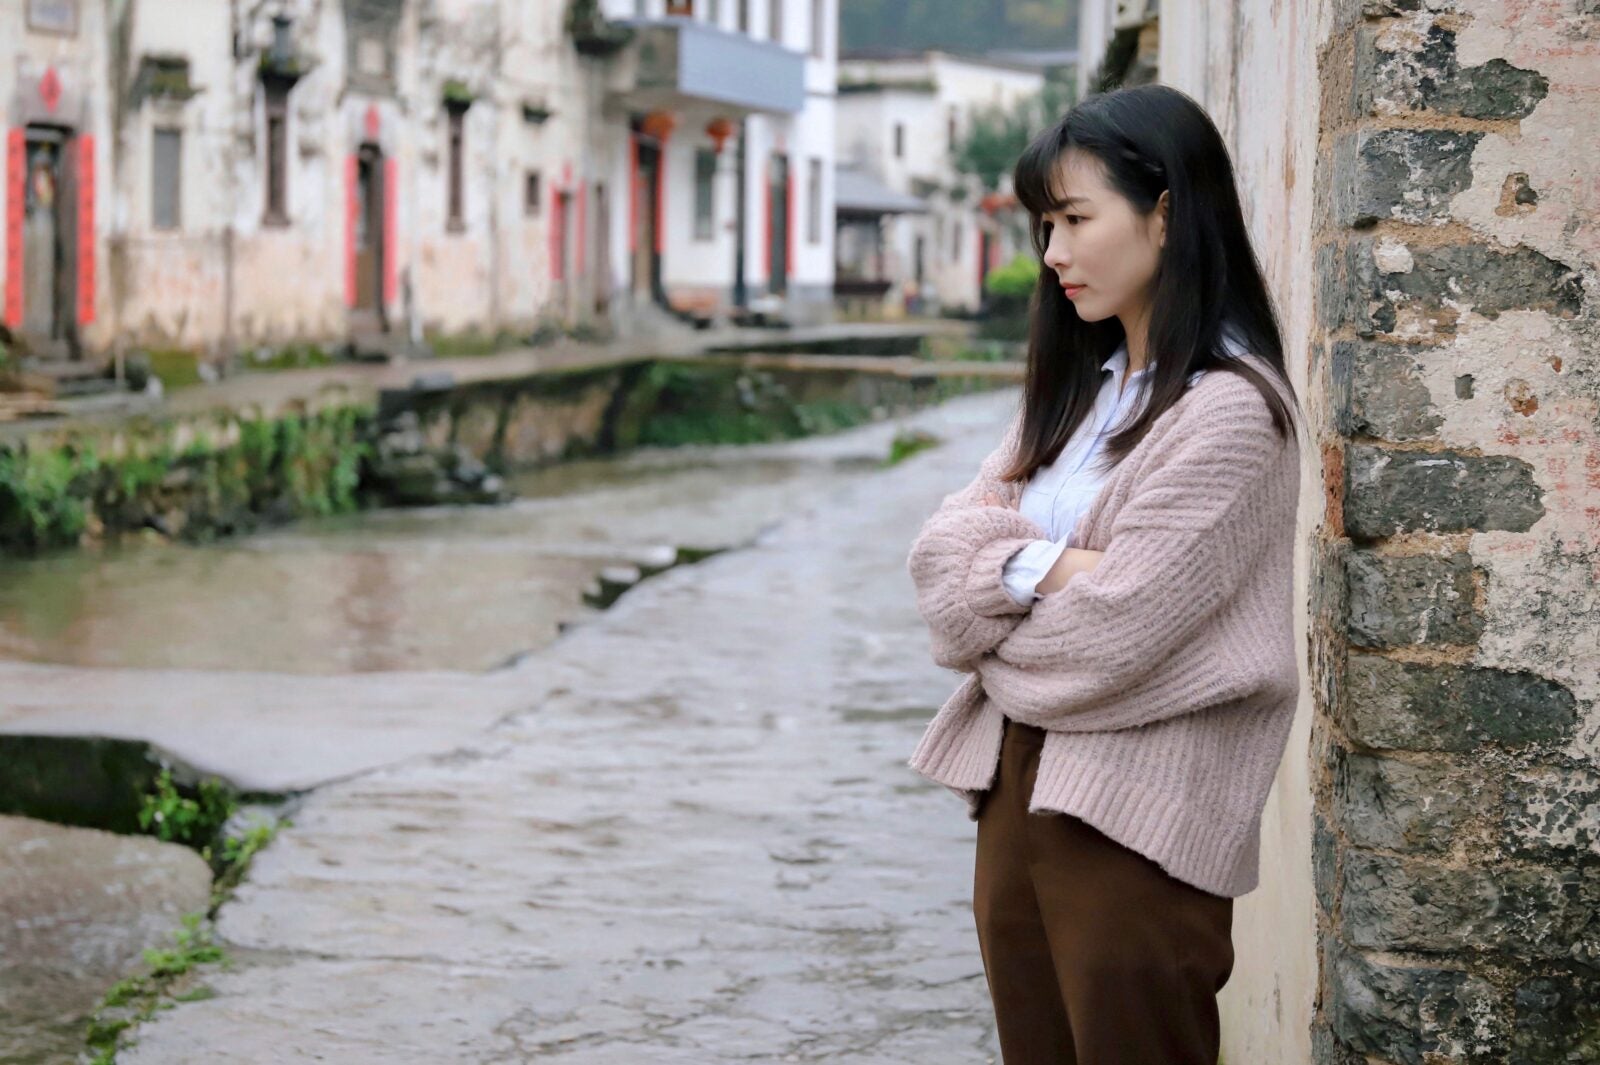 A young Asian woman wearing a beige cardigan, white shirt and brown pants stand with her hands crossed over each other while looking unhappily in the distance.